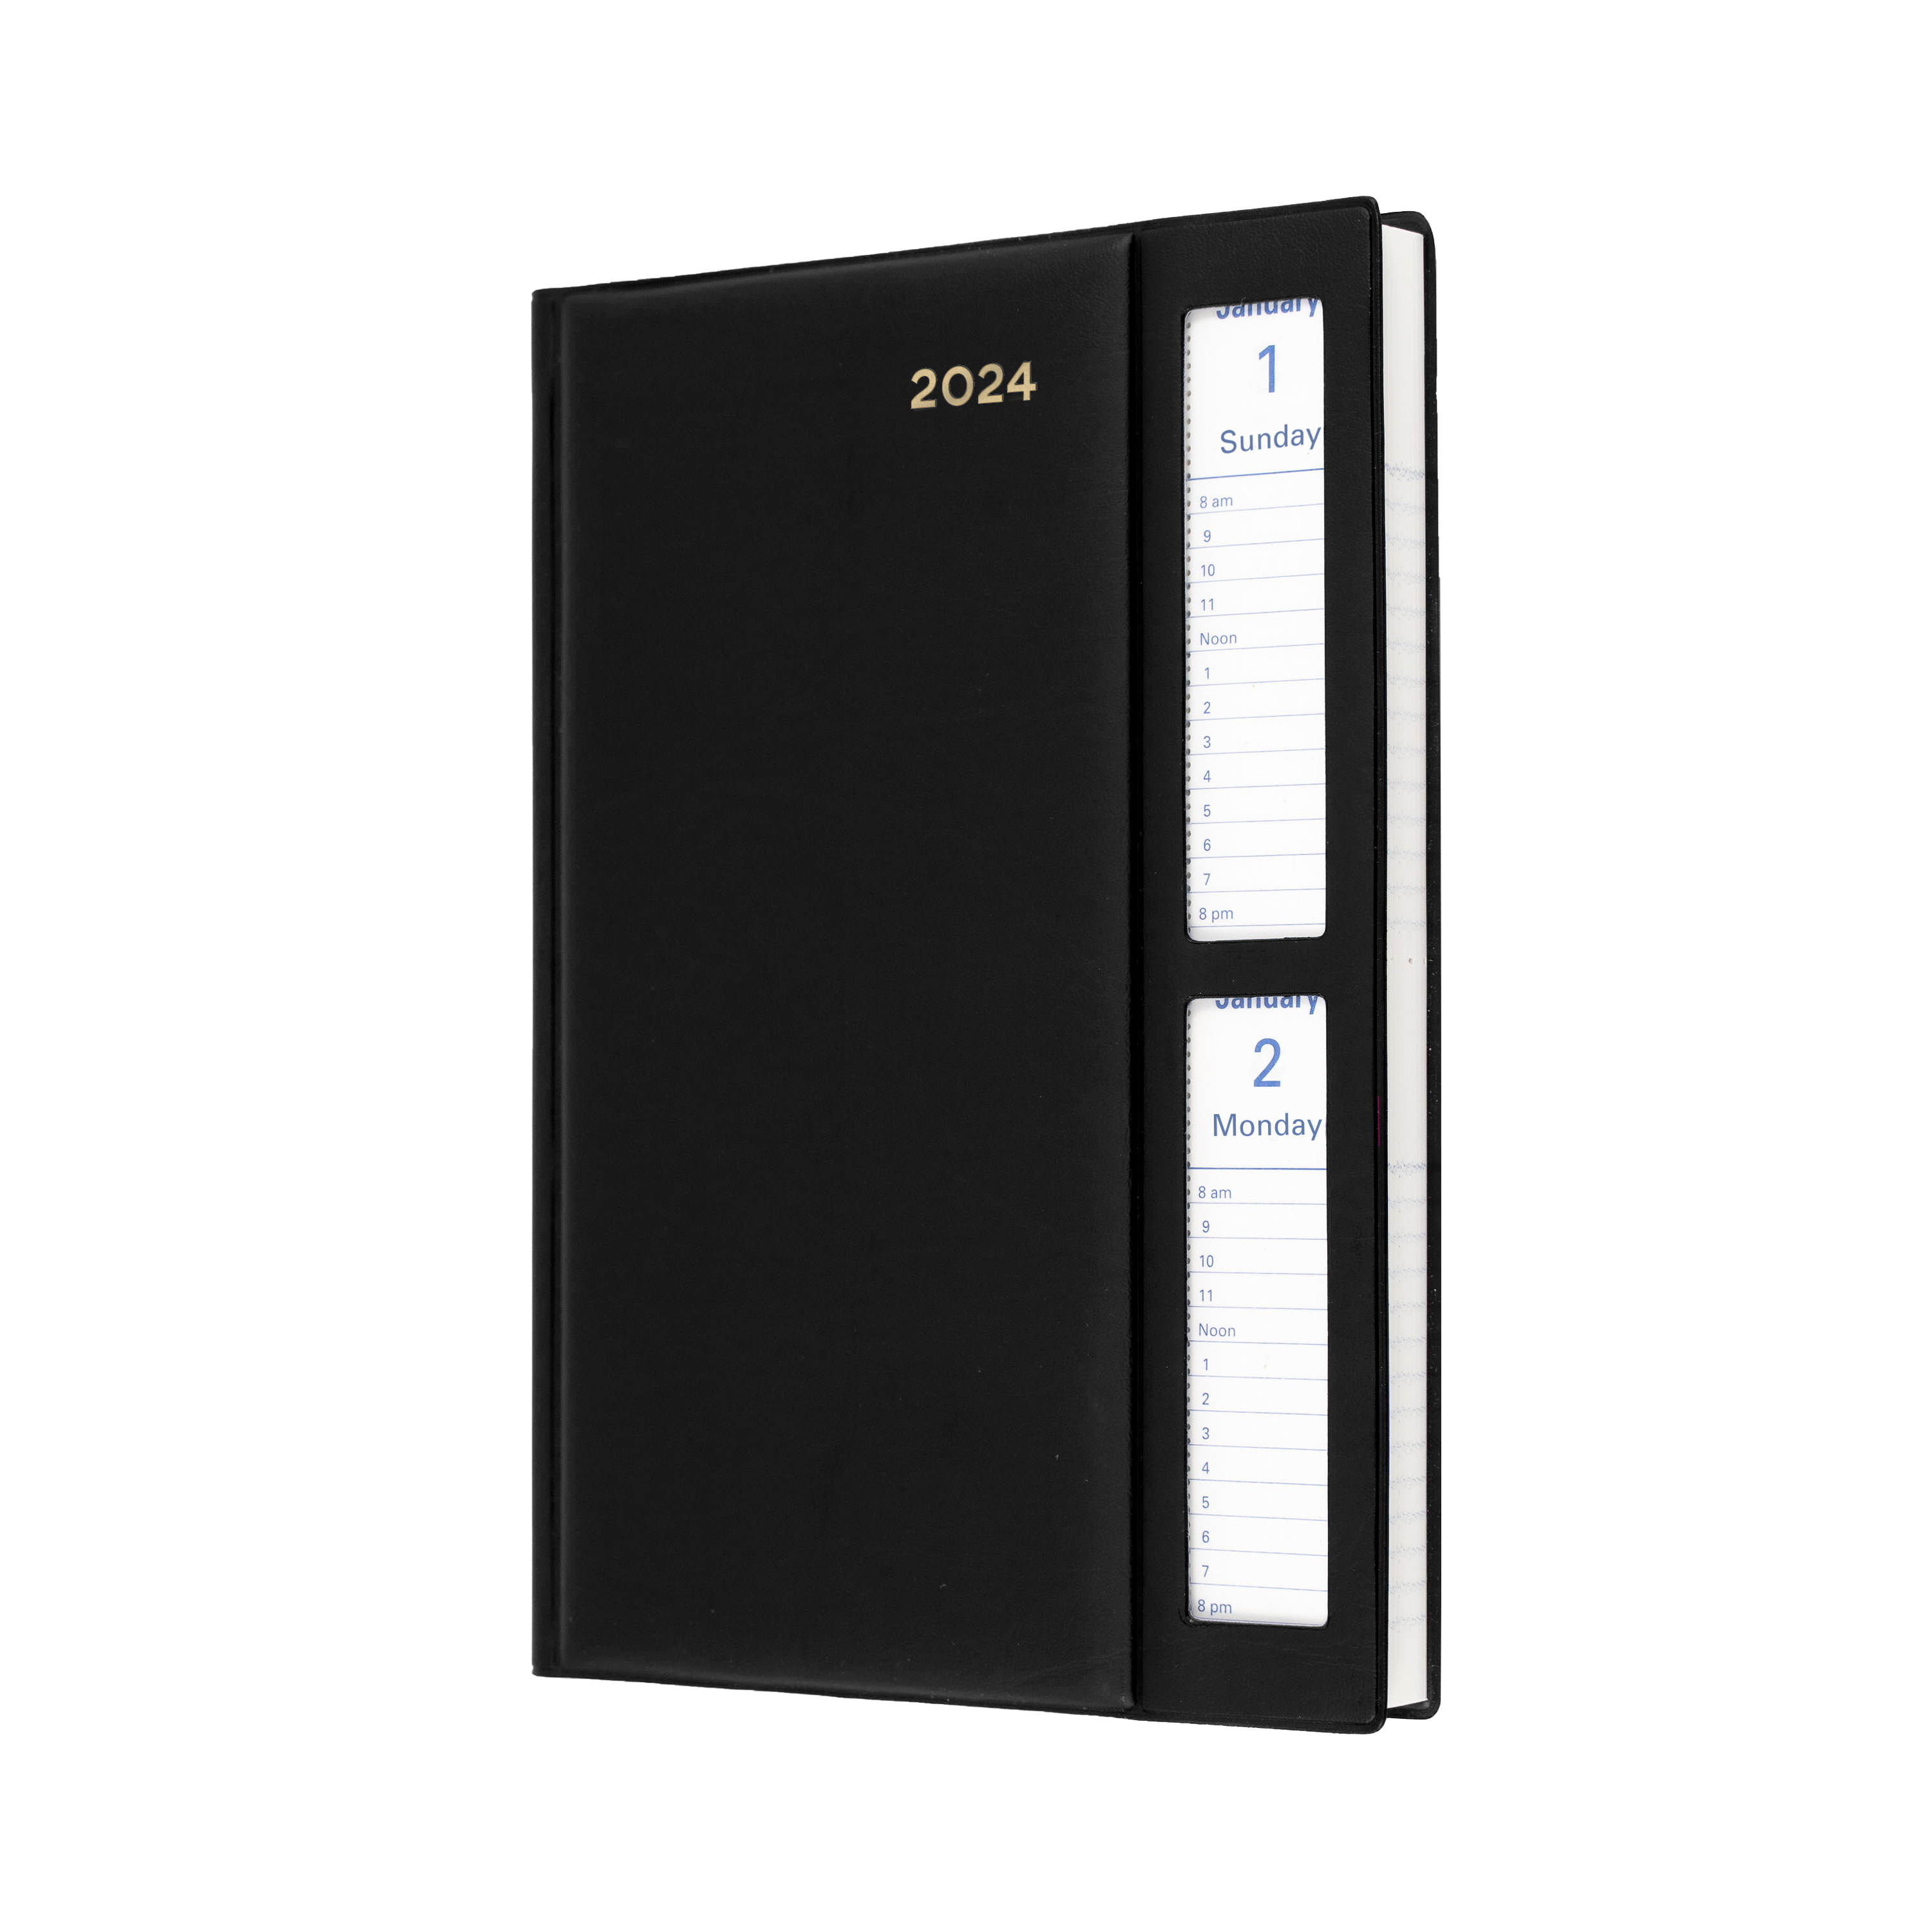 Collins Belmont Desk 2024 Diary - 2 Days to a Page View + Window